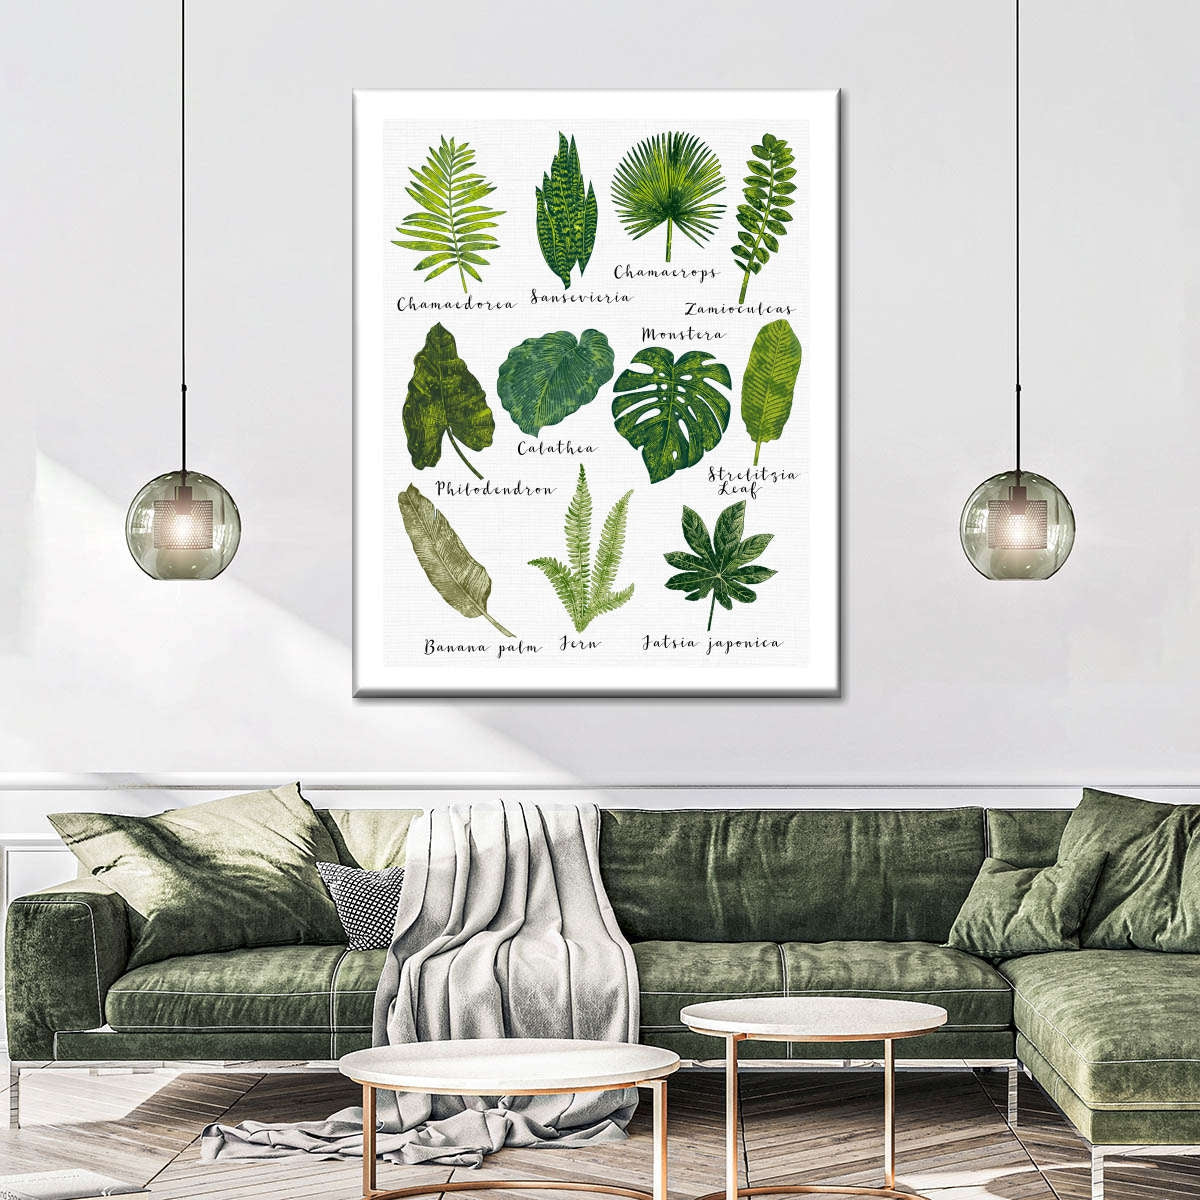 Mix Vintage Decor with Floral and Botanical Art